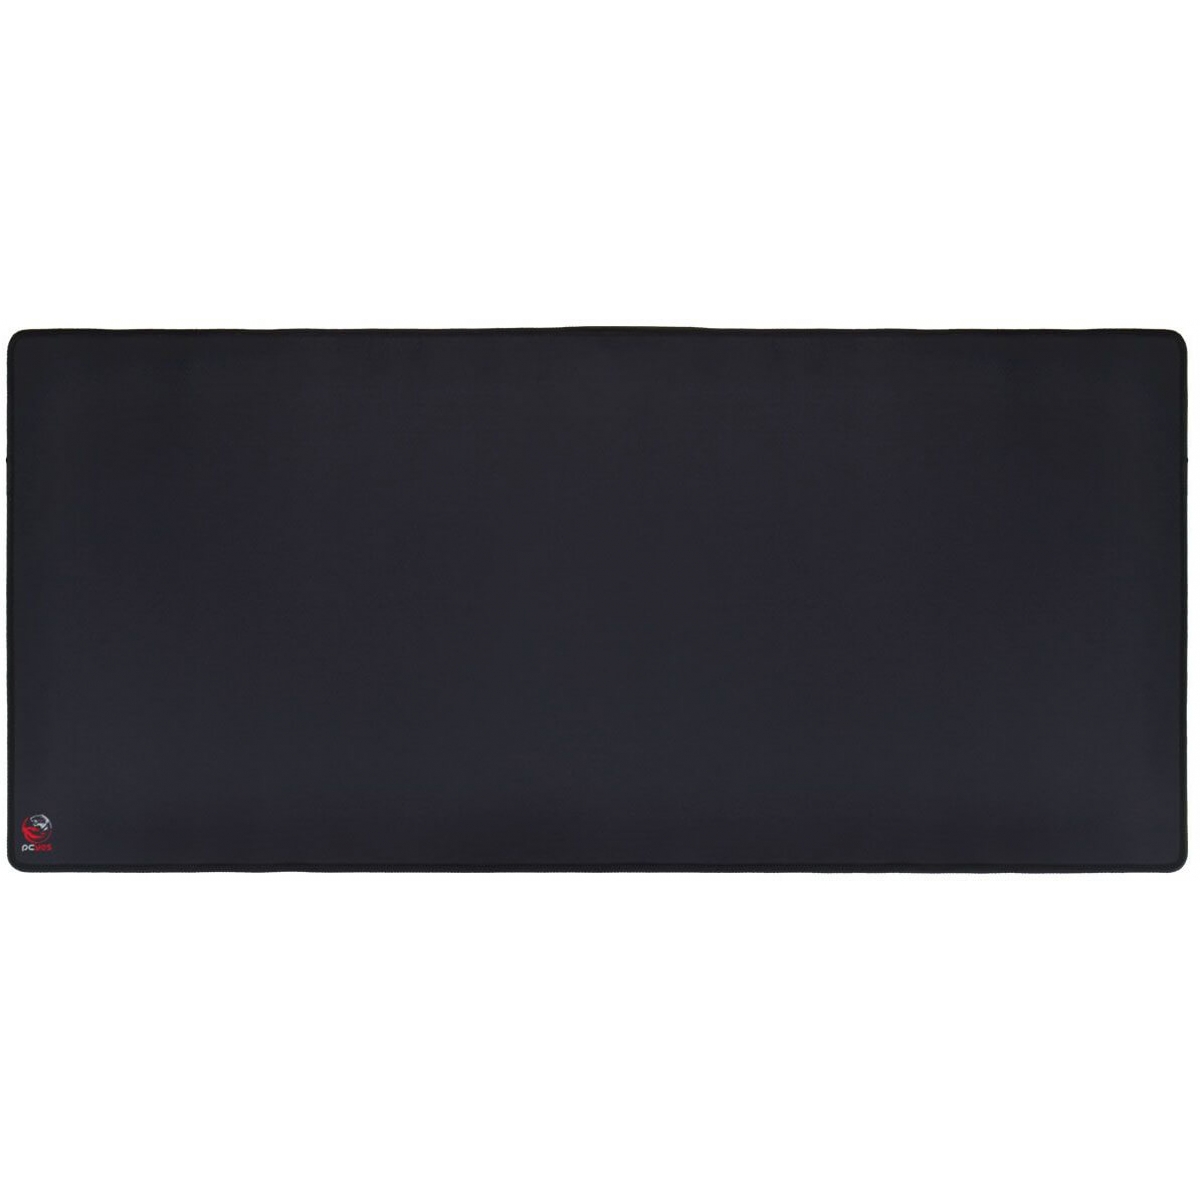 Mouse Pad Gamer PCyes Essential Extended Borda Costurada EE90X42